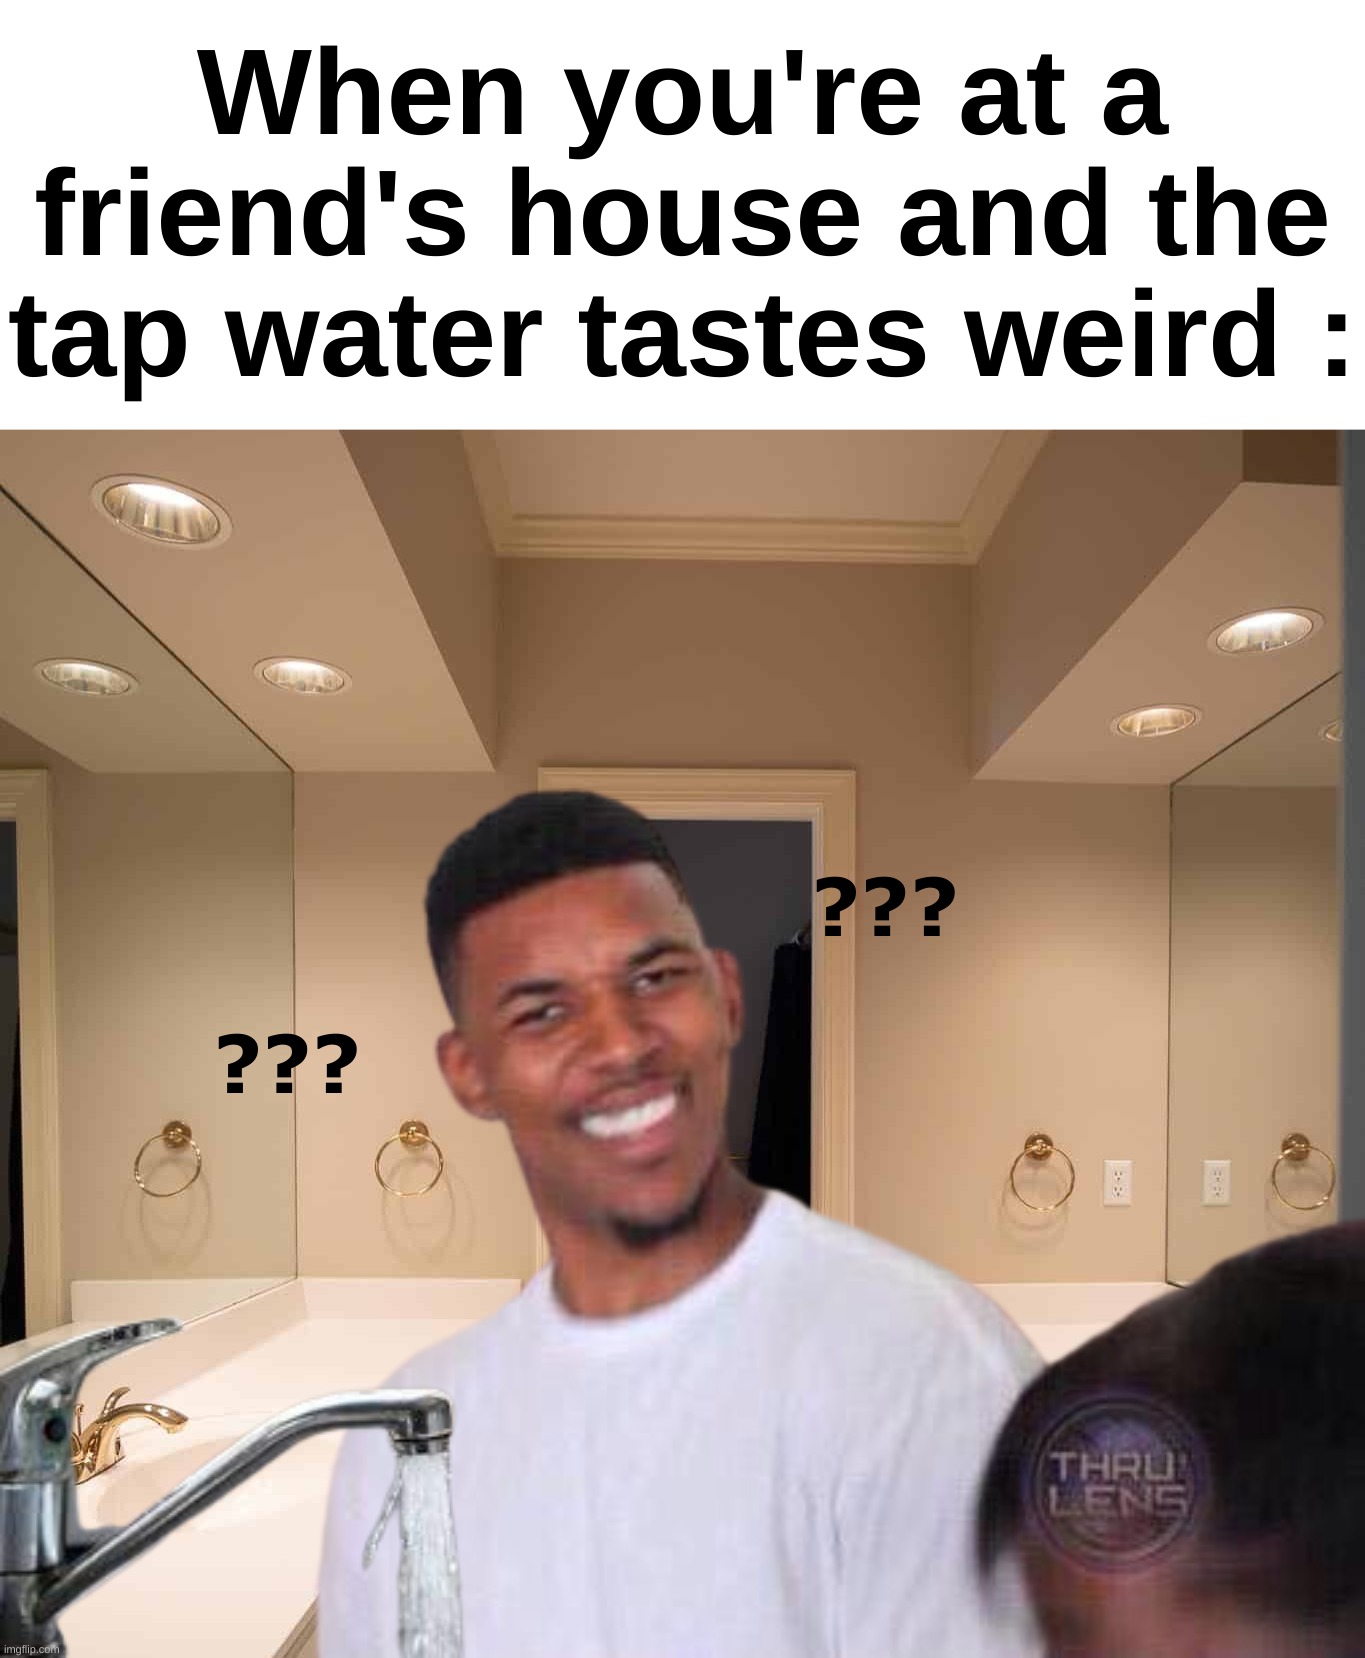 Took a while to make this | When you're at a friend's house and the tap water tastes weird :; ??? ??? | image tagged in memes,funny,relatable,tap water,weird,front page plz | made w/ Imgflip meme maker